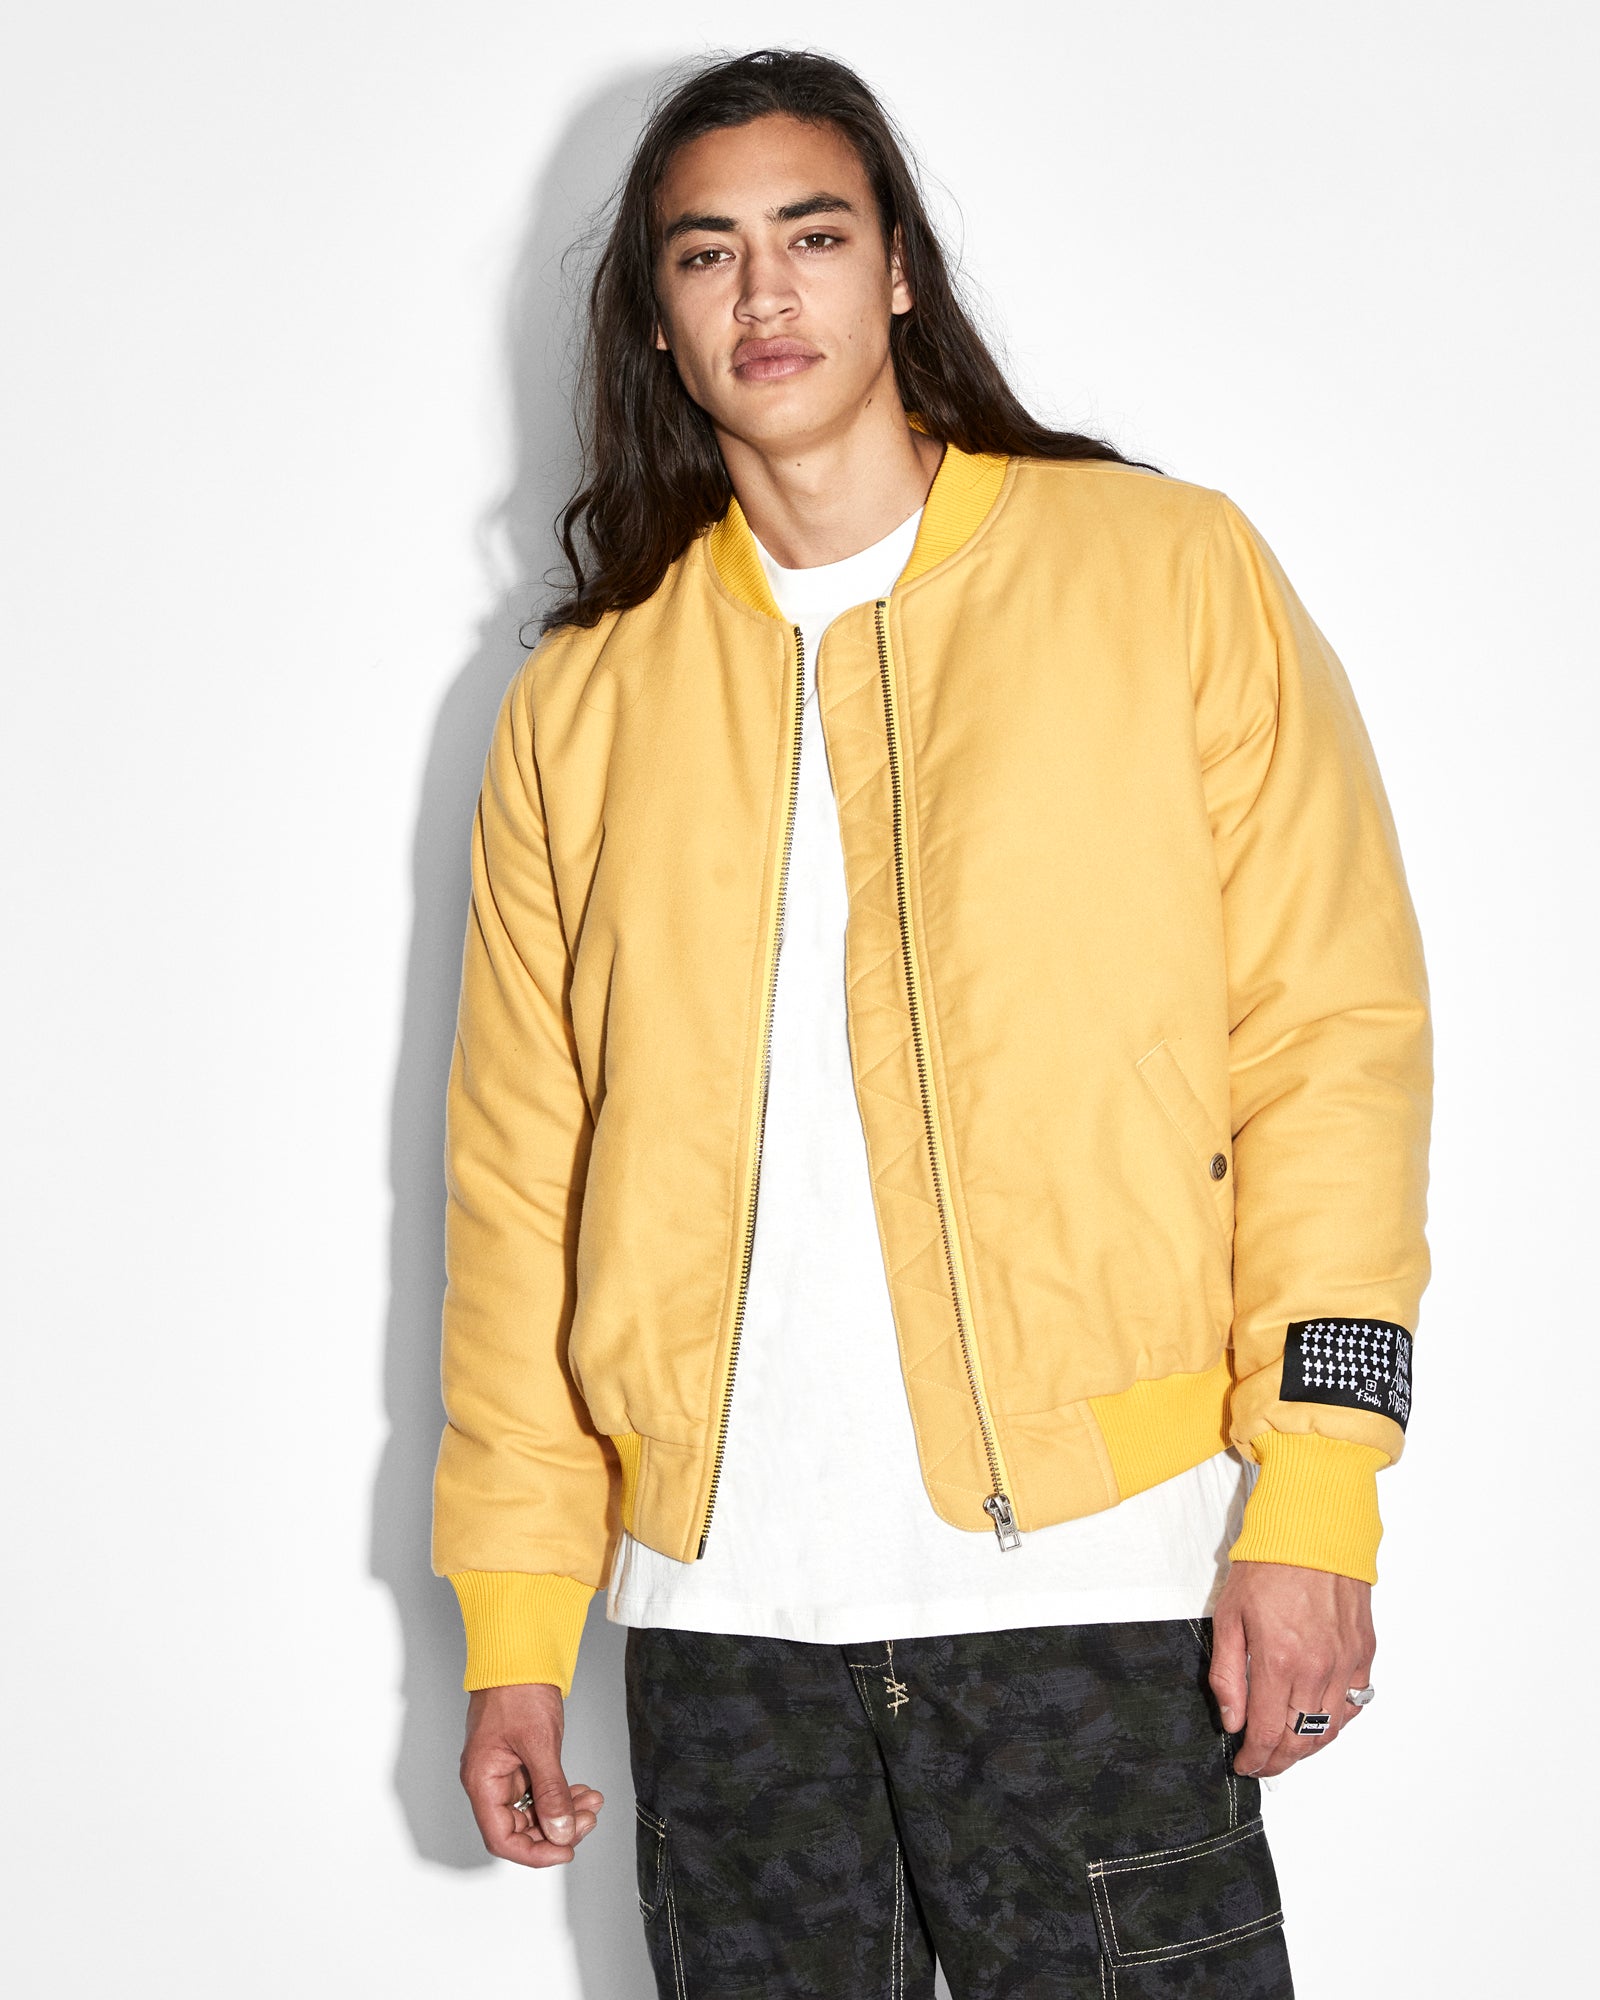 Buy Now This Mens Yellow Quilted Leather Bomber Jacket